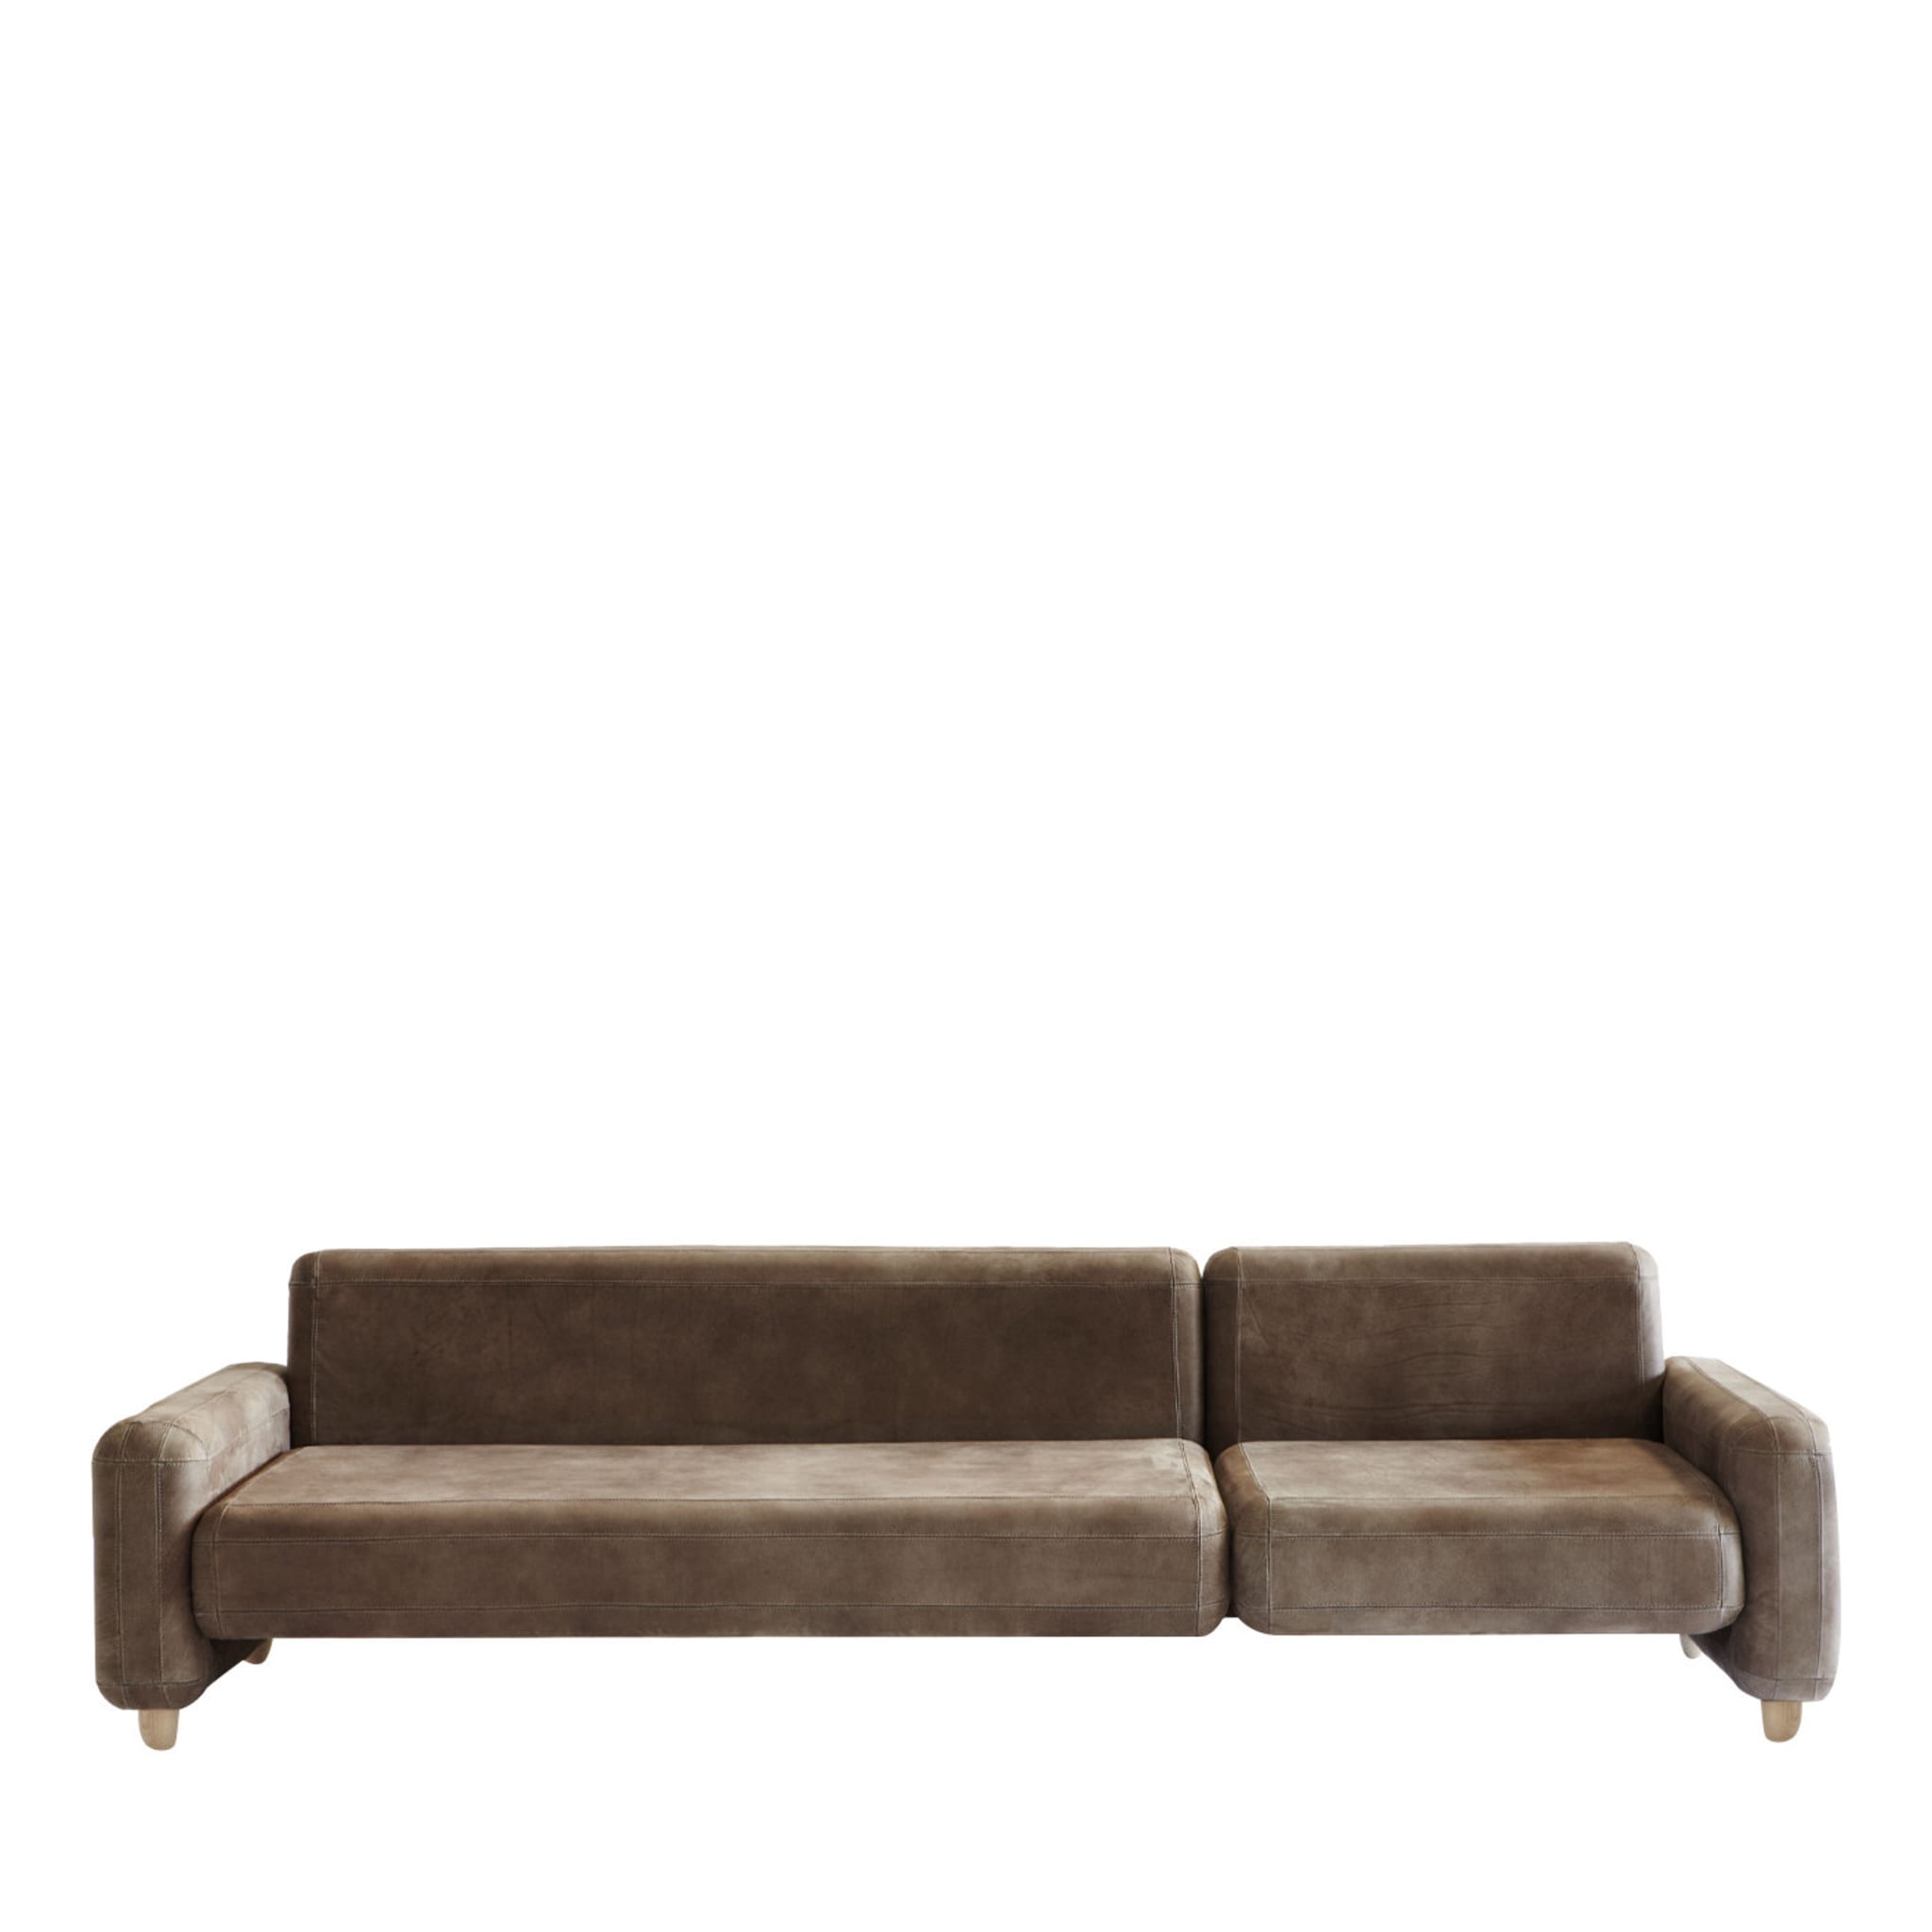 Traco Natural Gray Leather Sofa by Paolo Capello - Main view